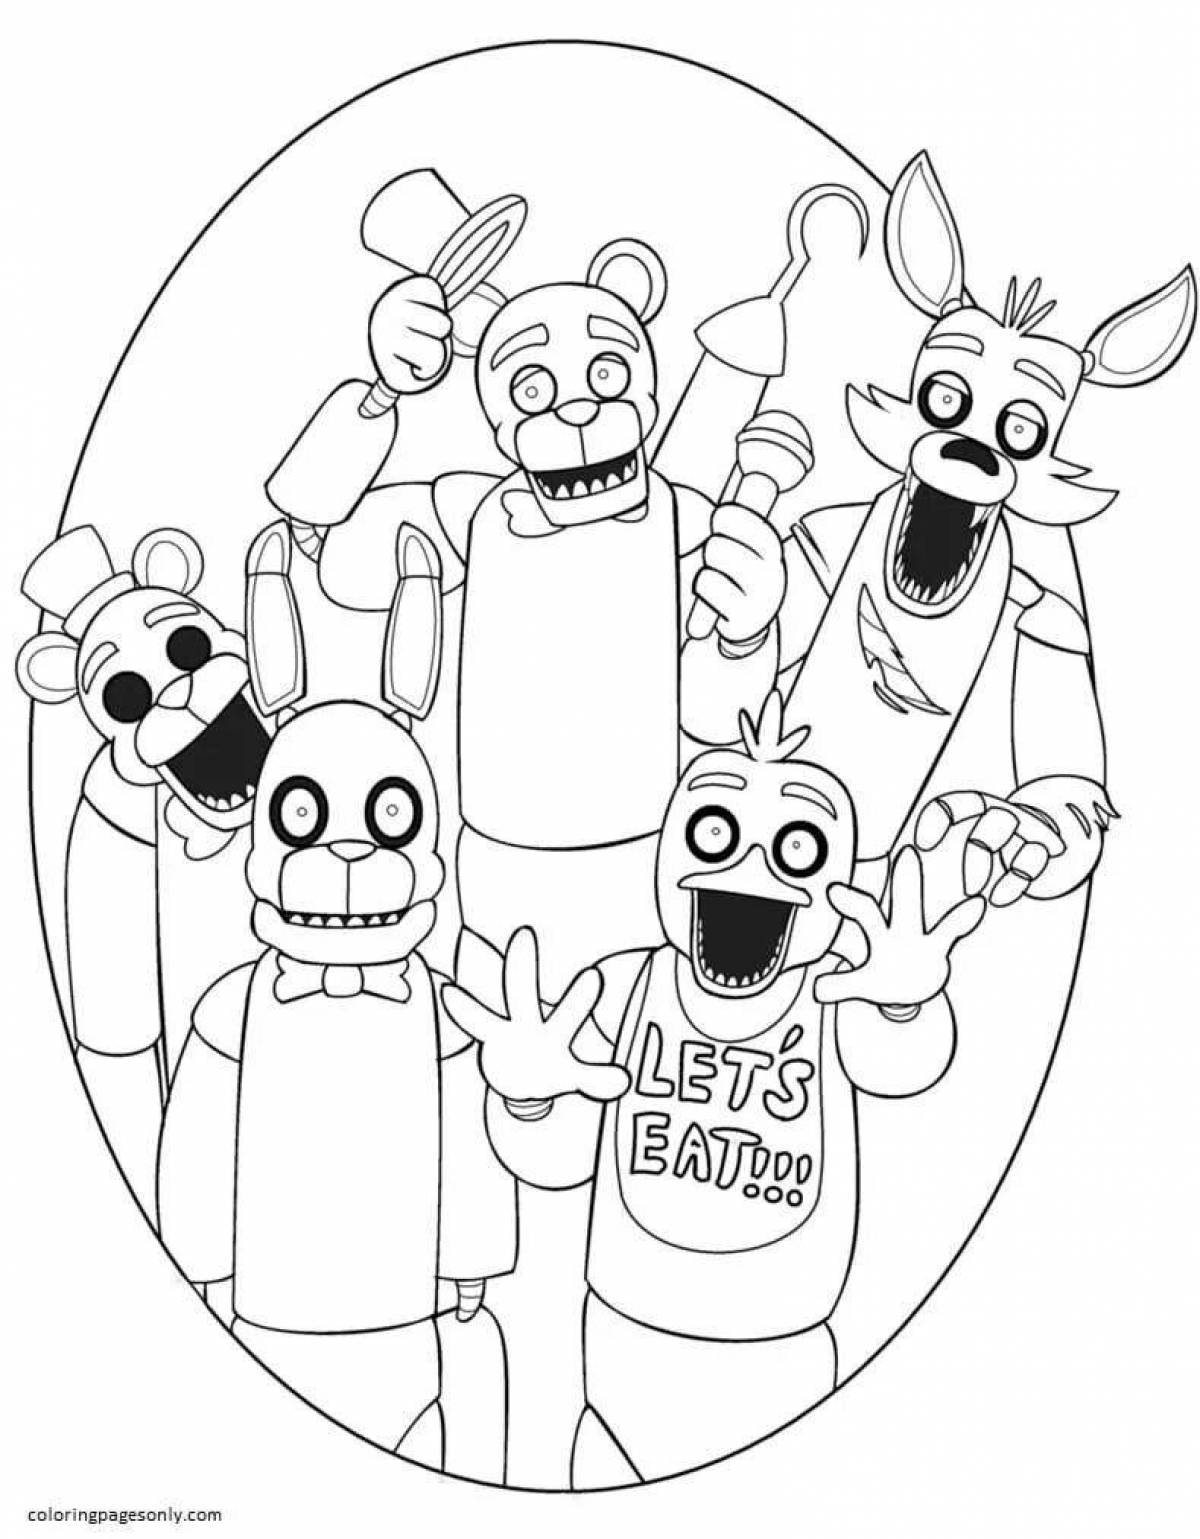 Colorful five nights at freddy's coloring book